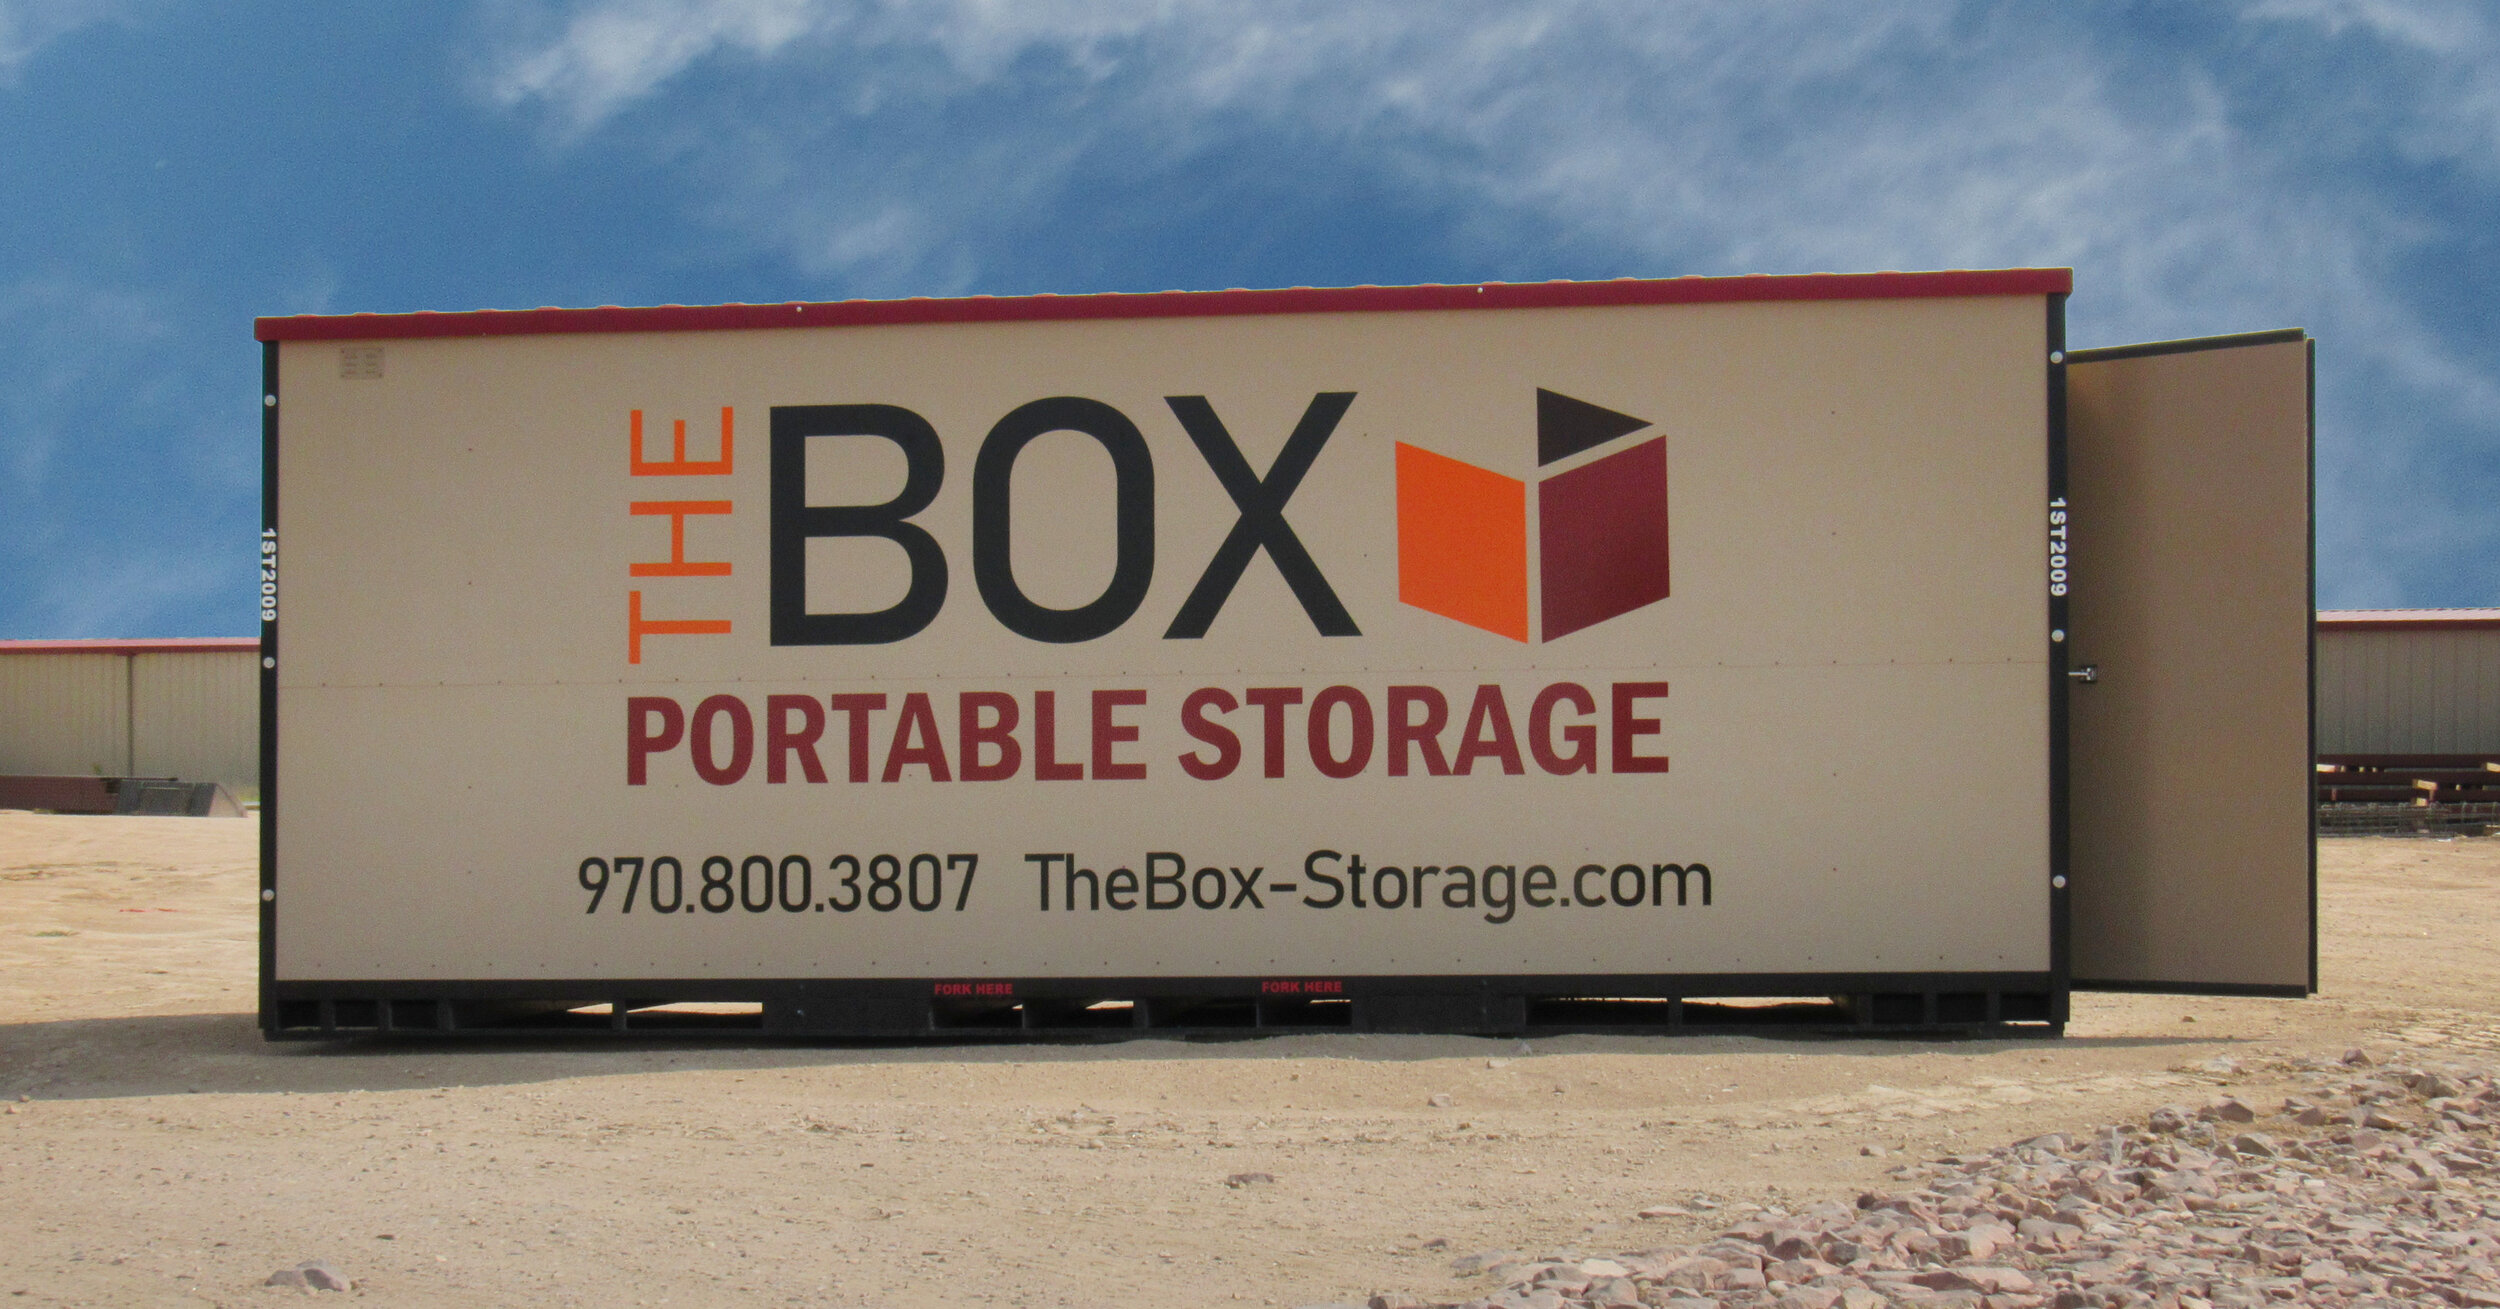 See the Inside of our Portable Storage Container - The Box